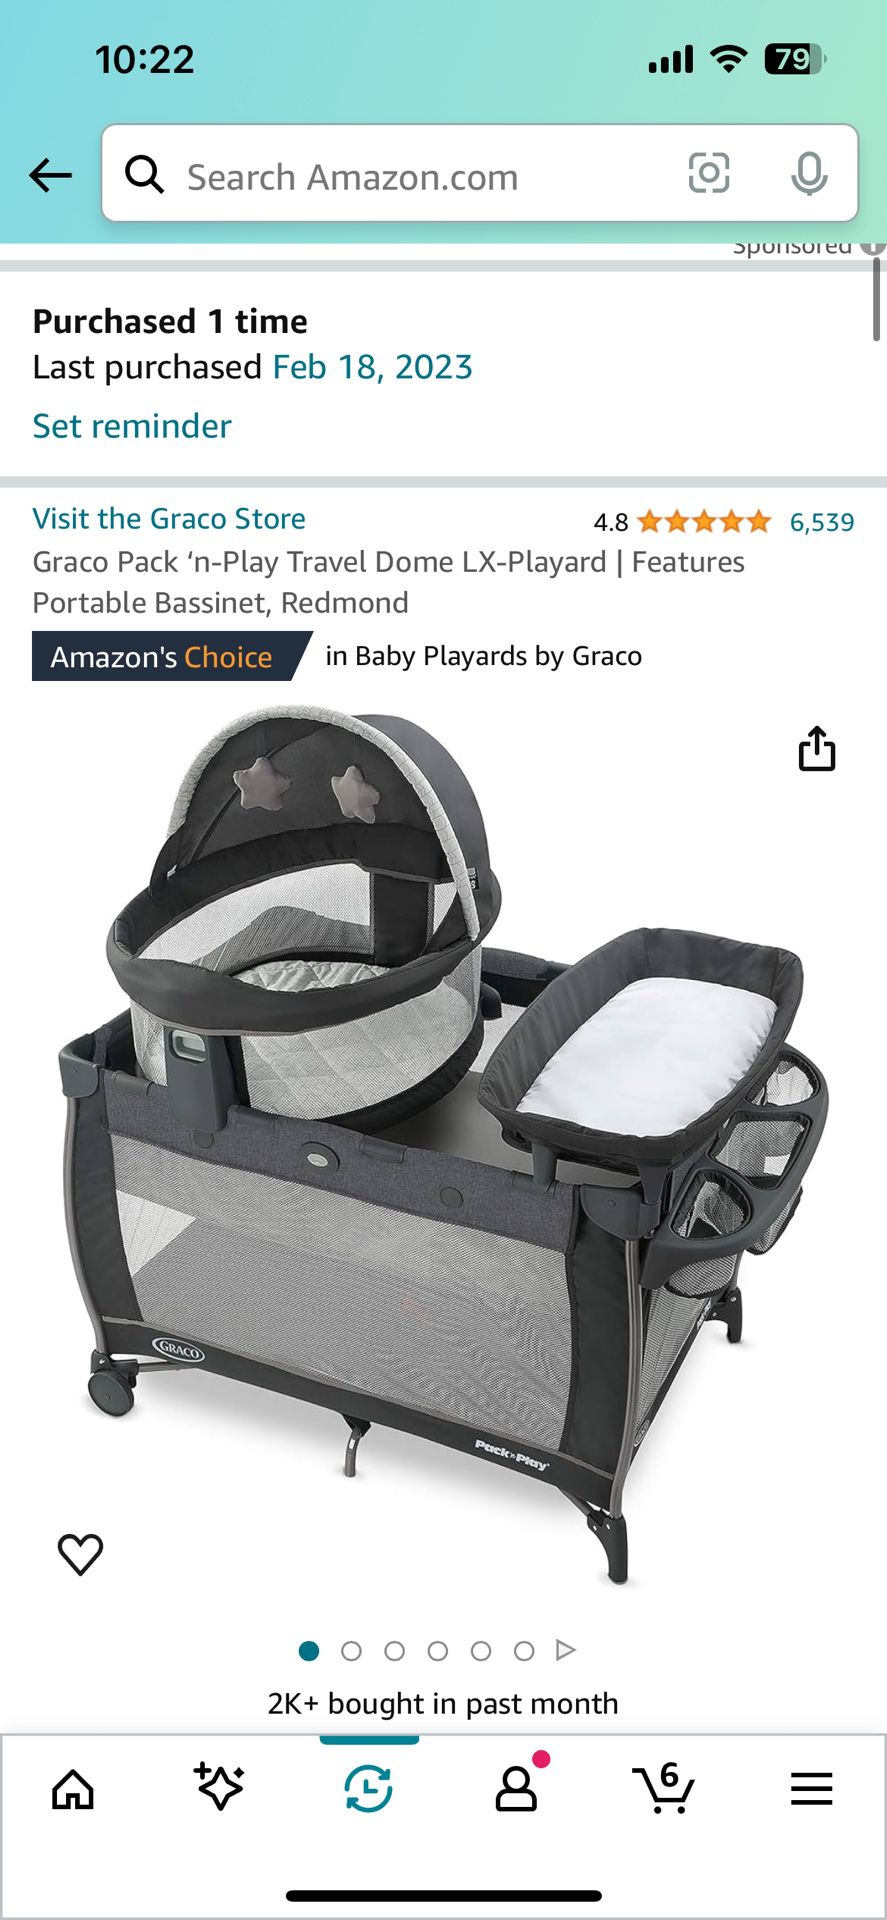 Graco Pack ‘n-Play Travel Dome LX-Playard, Portable Bassinet, changing table.  Umbrella stroller